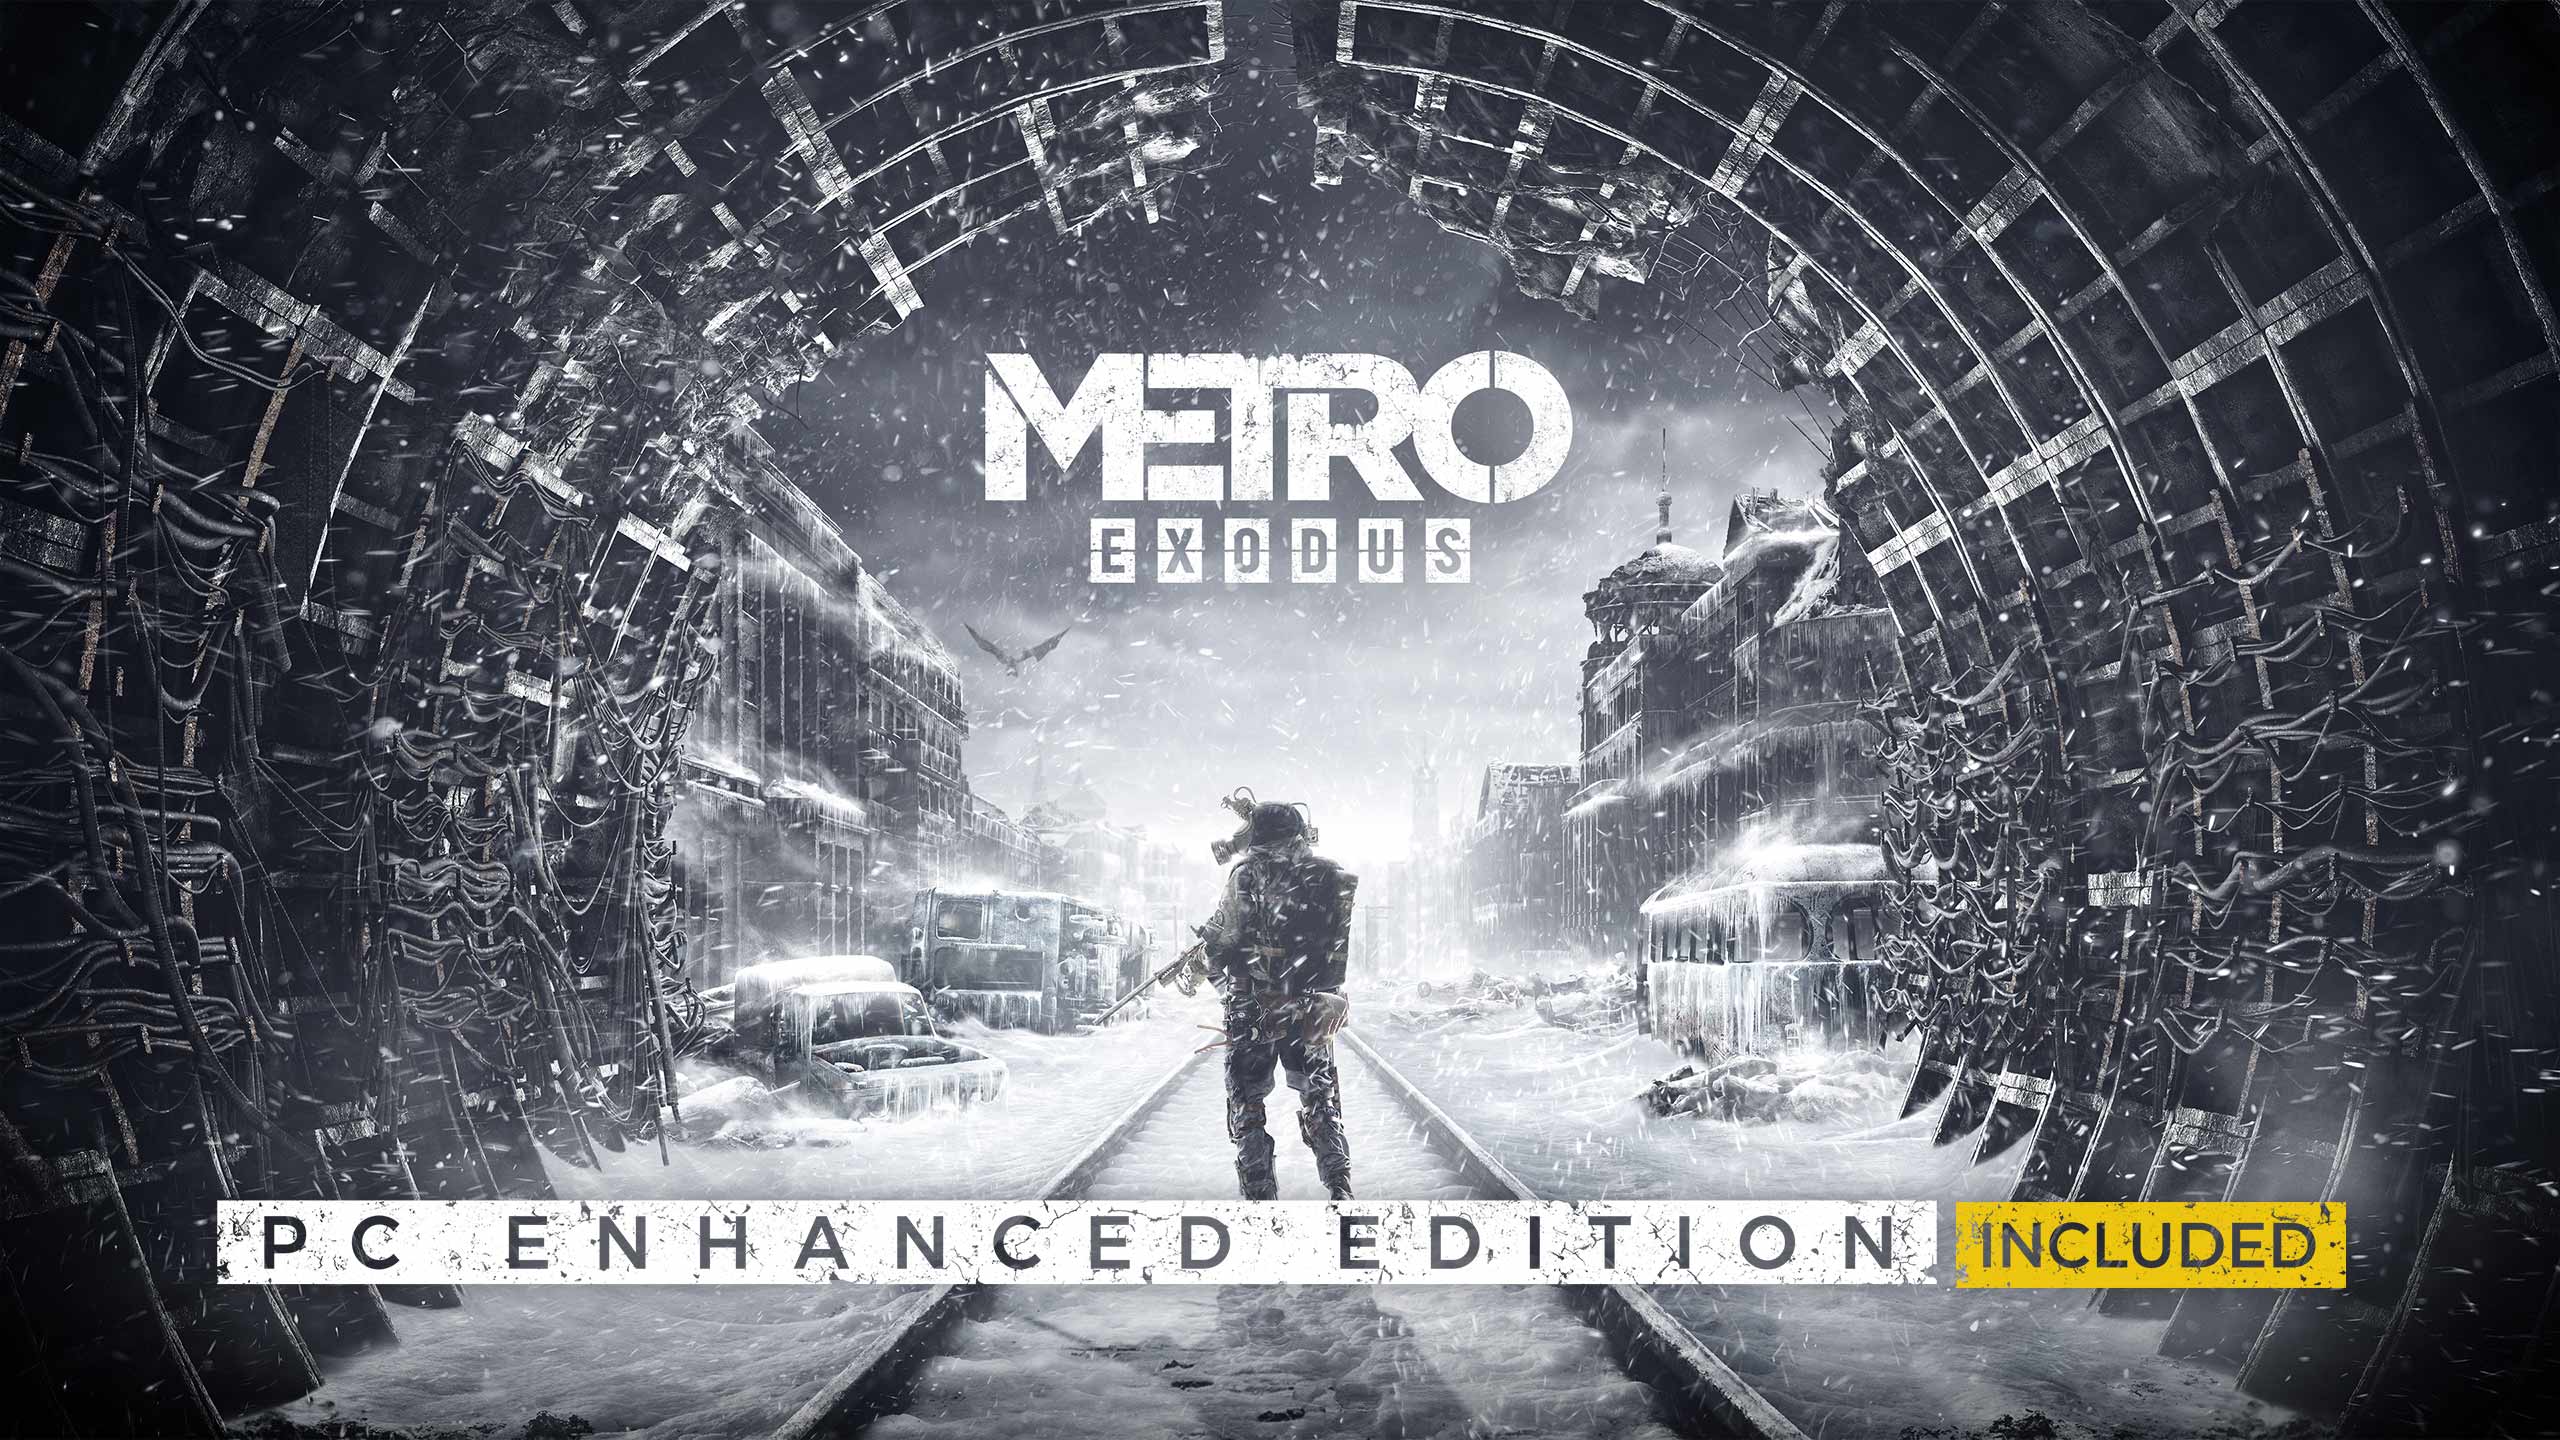 Can I enable RTX on windows 7, DX11 :: Metro Exodus Discussions générales